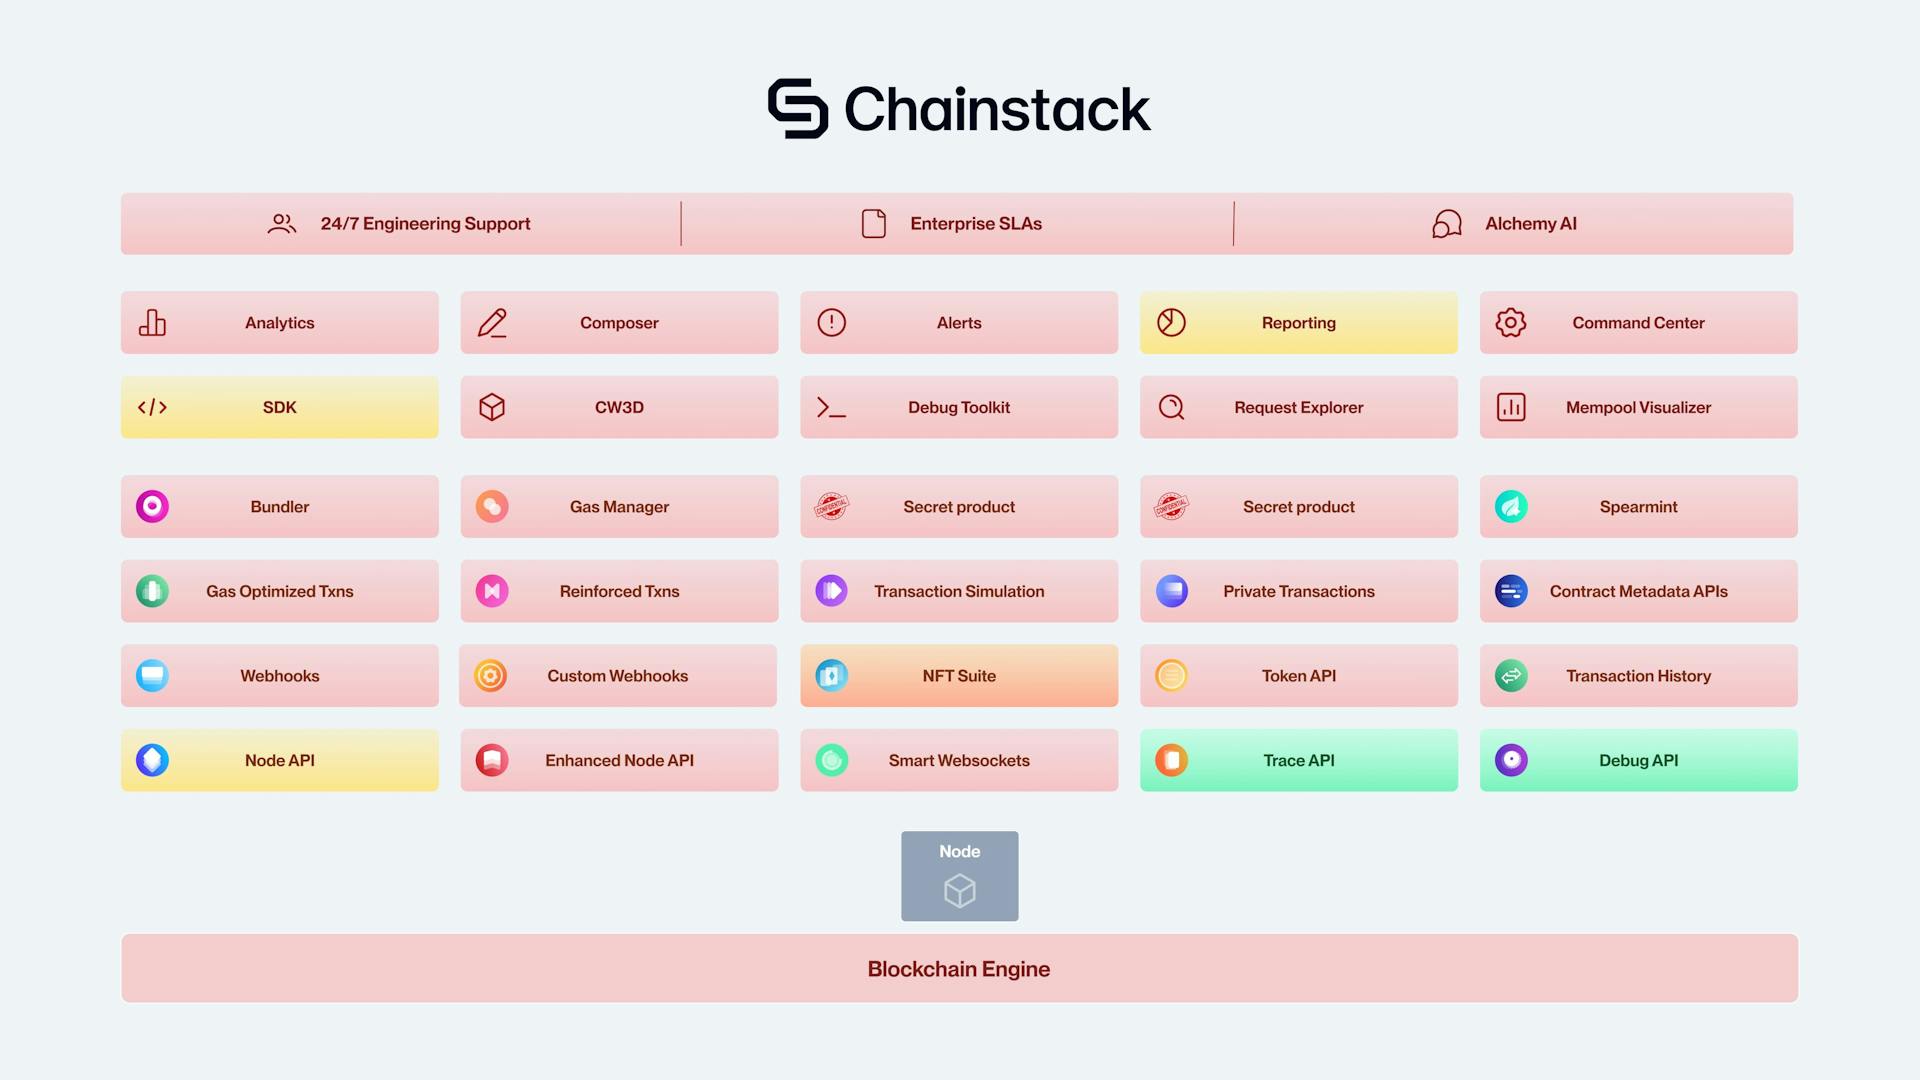 Chainstack Offers Very Little Compared to Alchemy's Product Suite